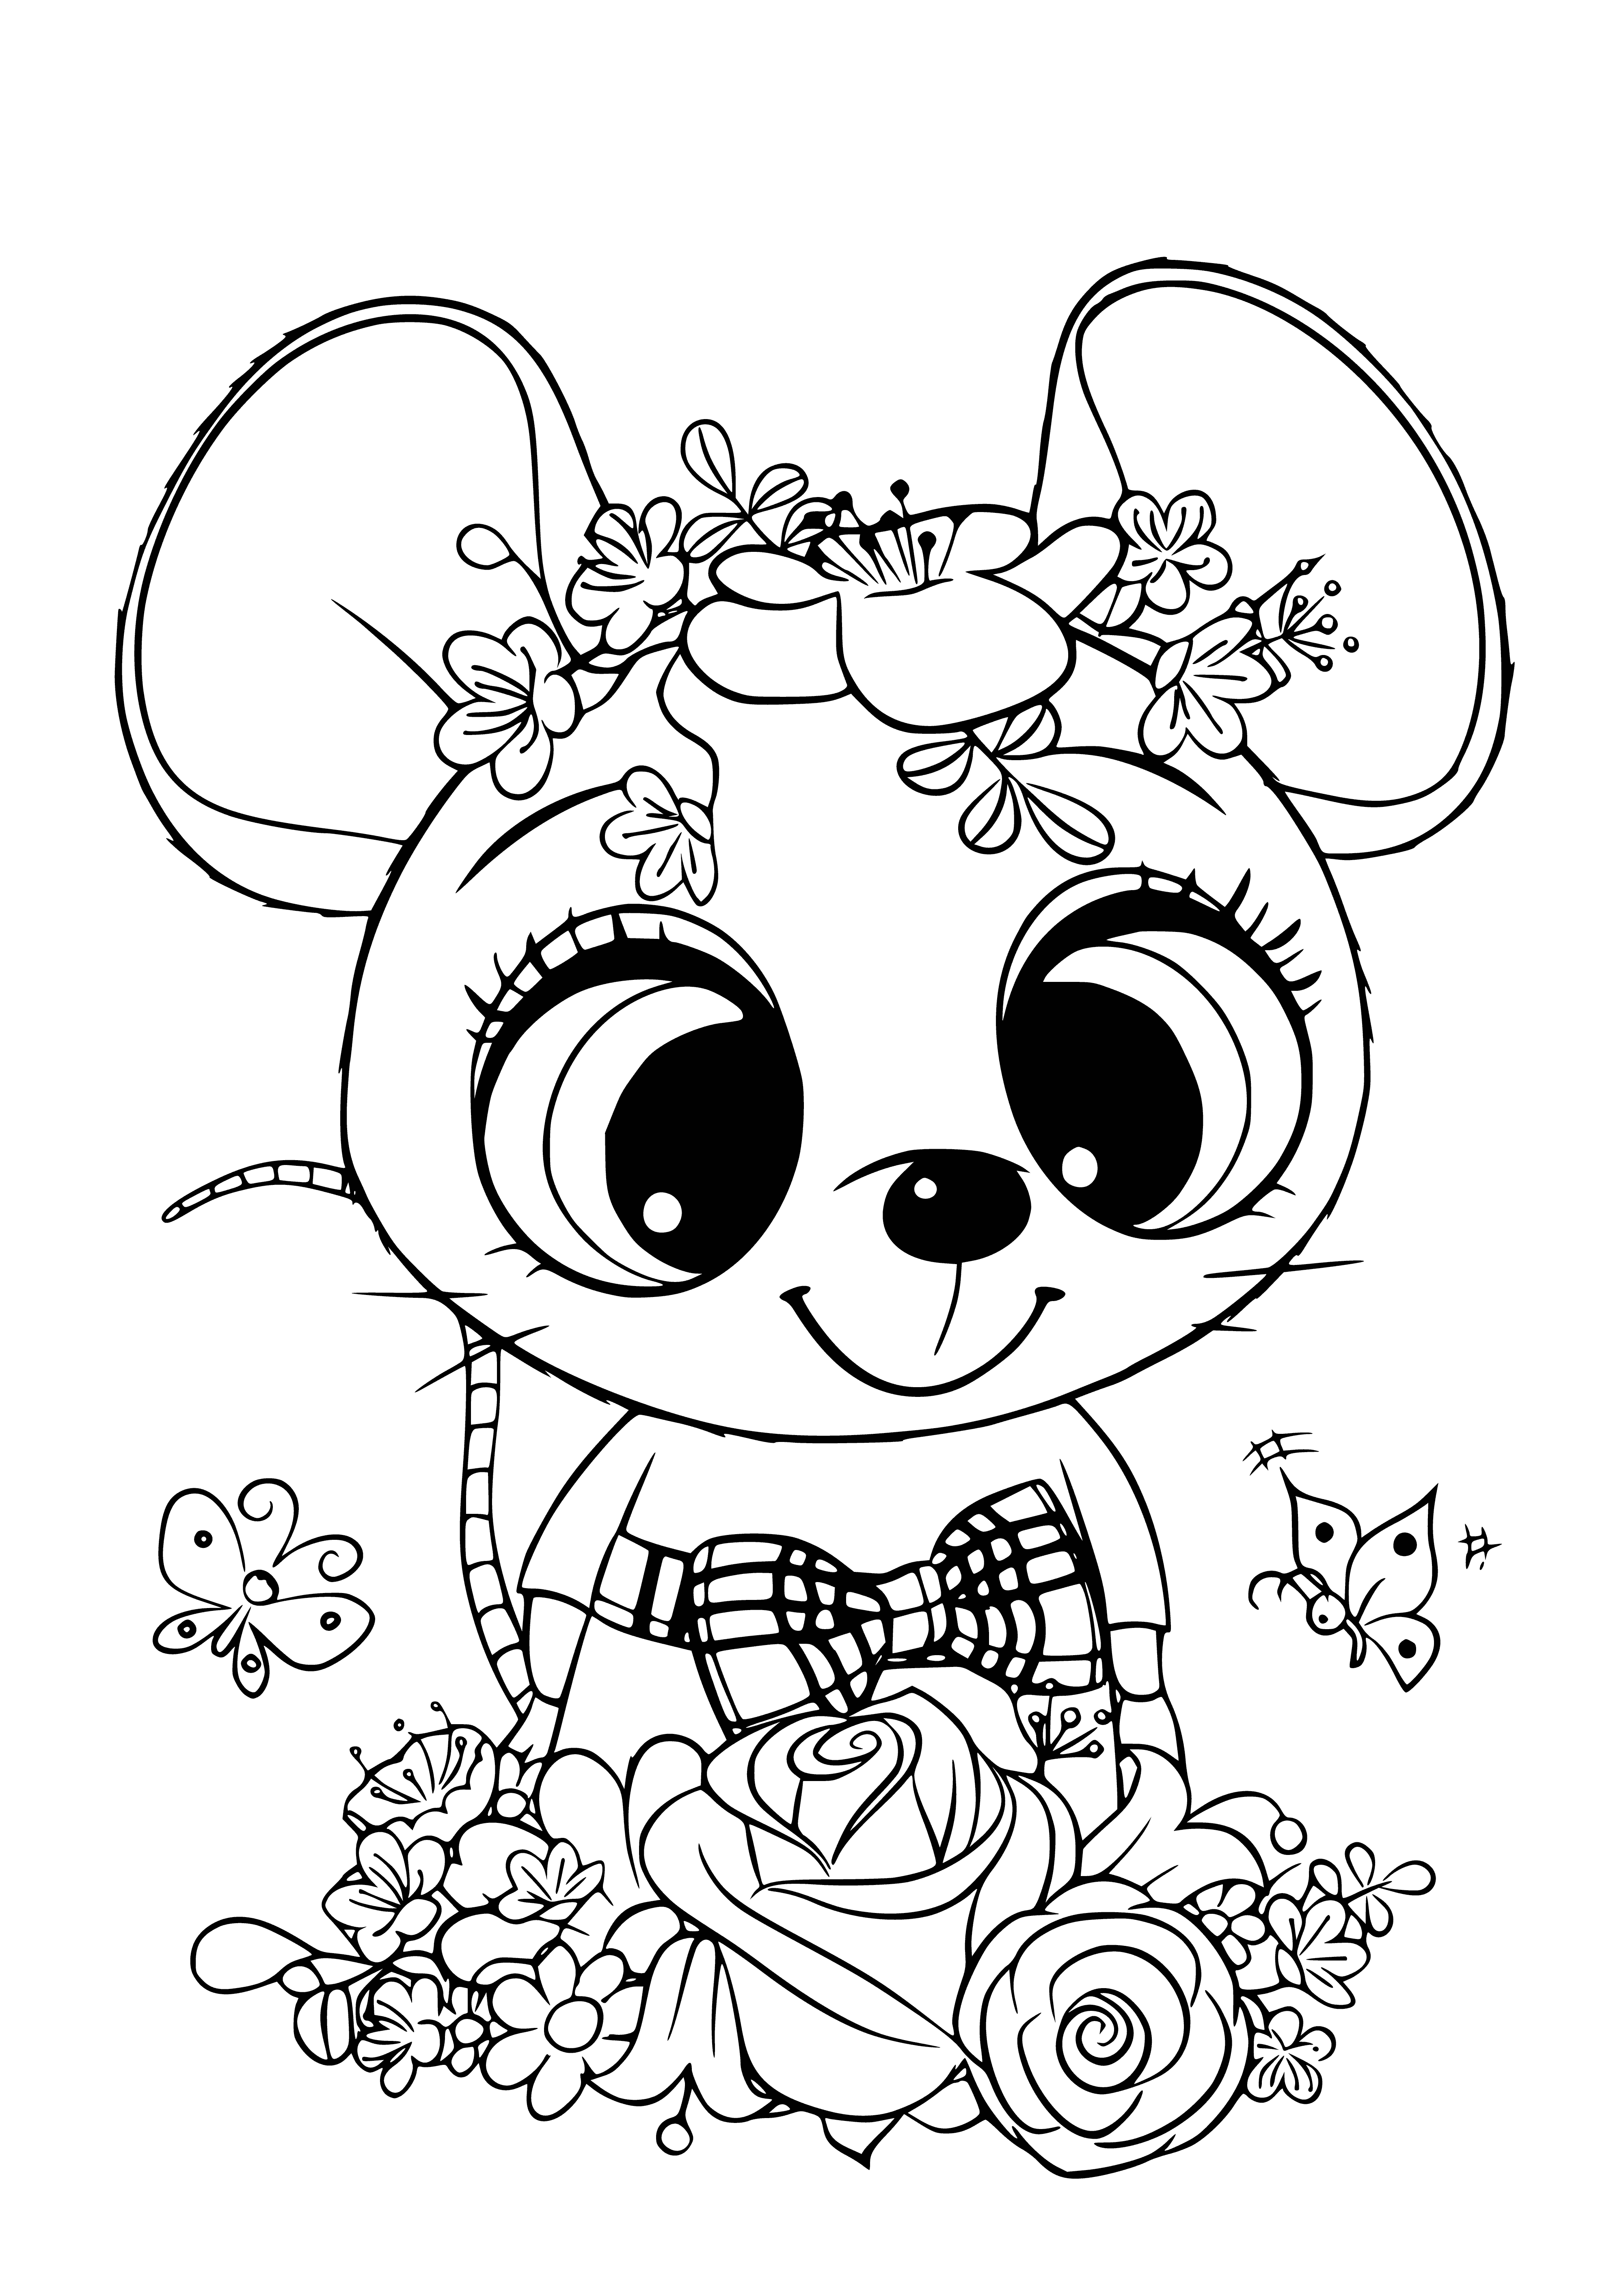 Mouse coloring page